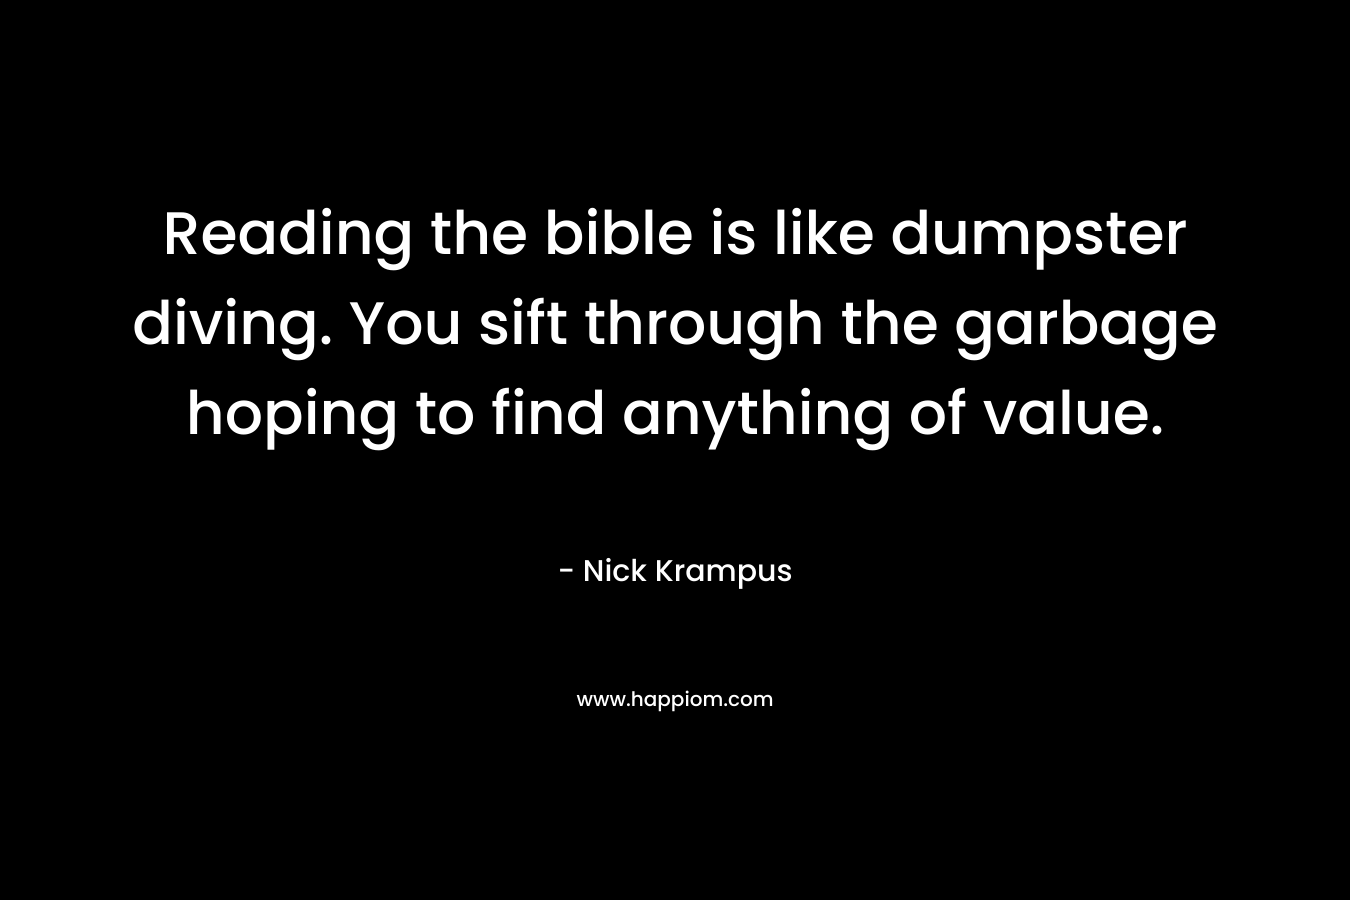 Reading the bible is like dumpster diving. You sift through the garbage hoping to find anything of value.